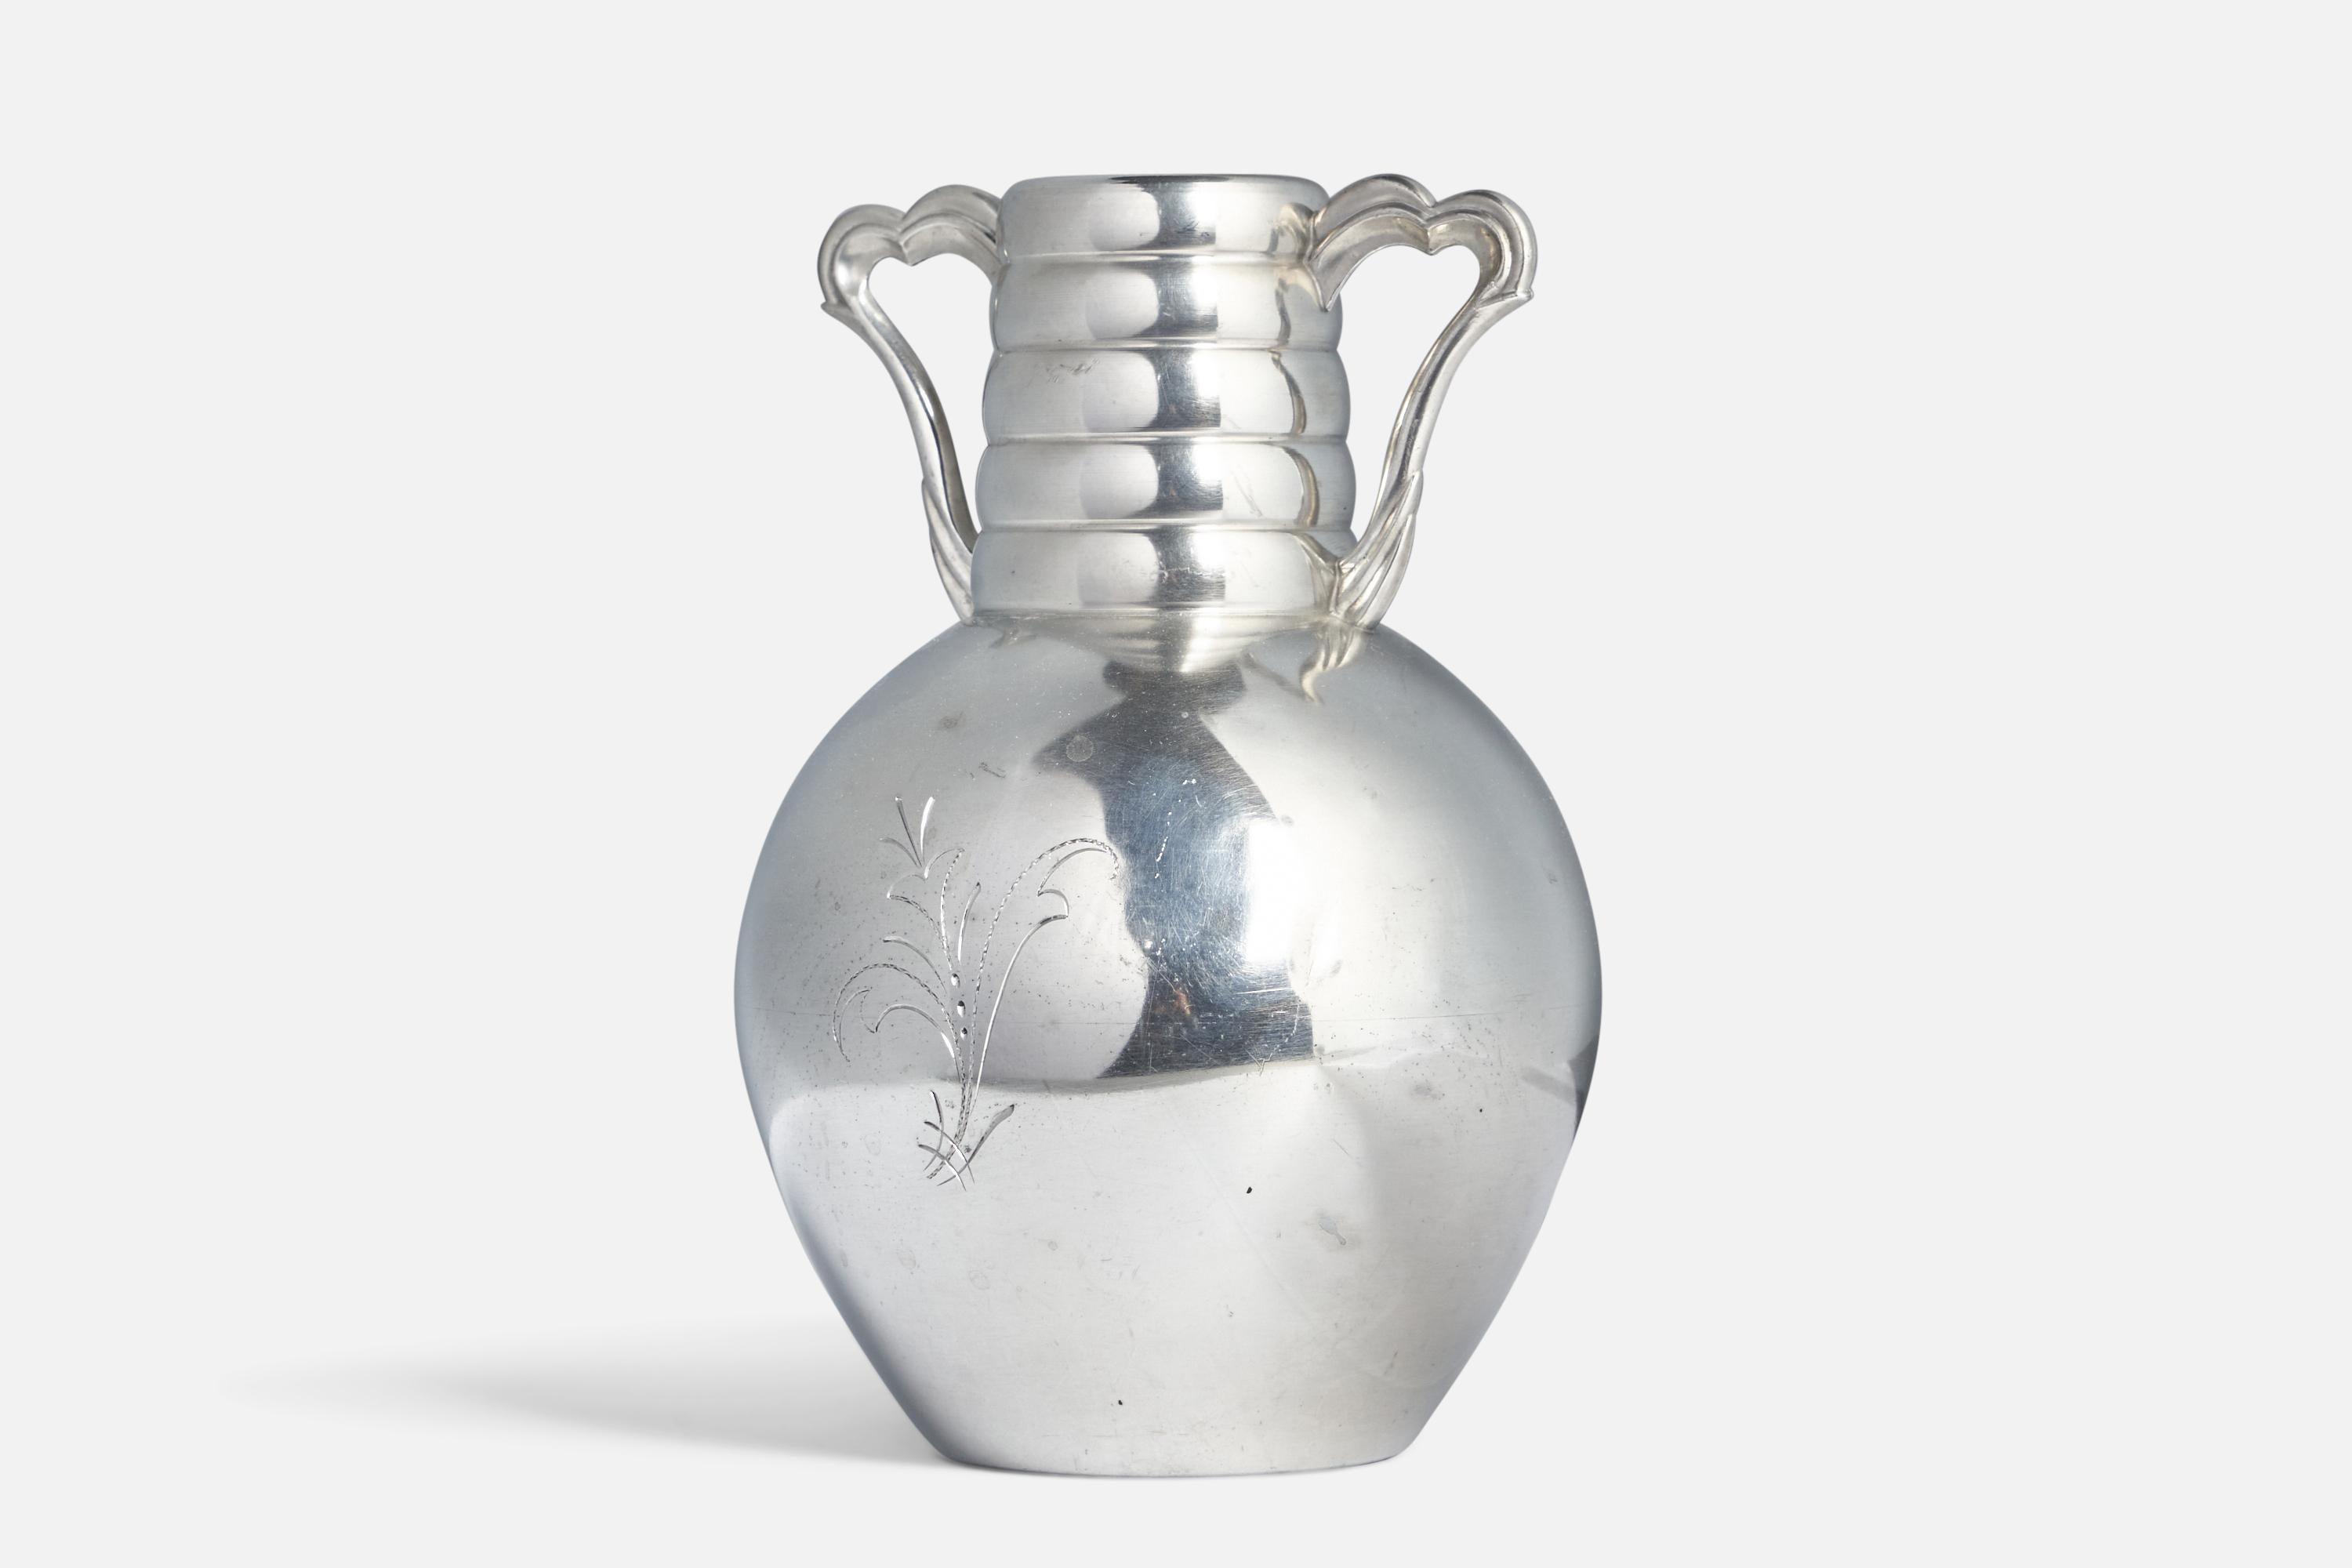 A pewter vase, designed and produced by Nordtenn, Sweden, c. 1930s